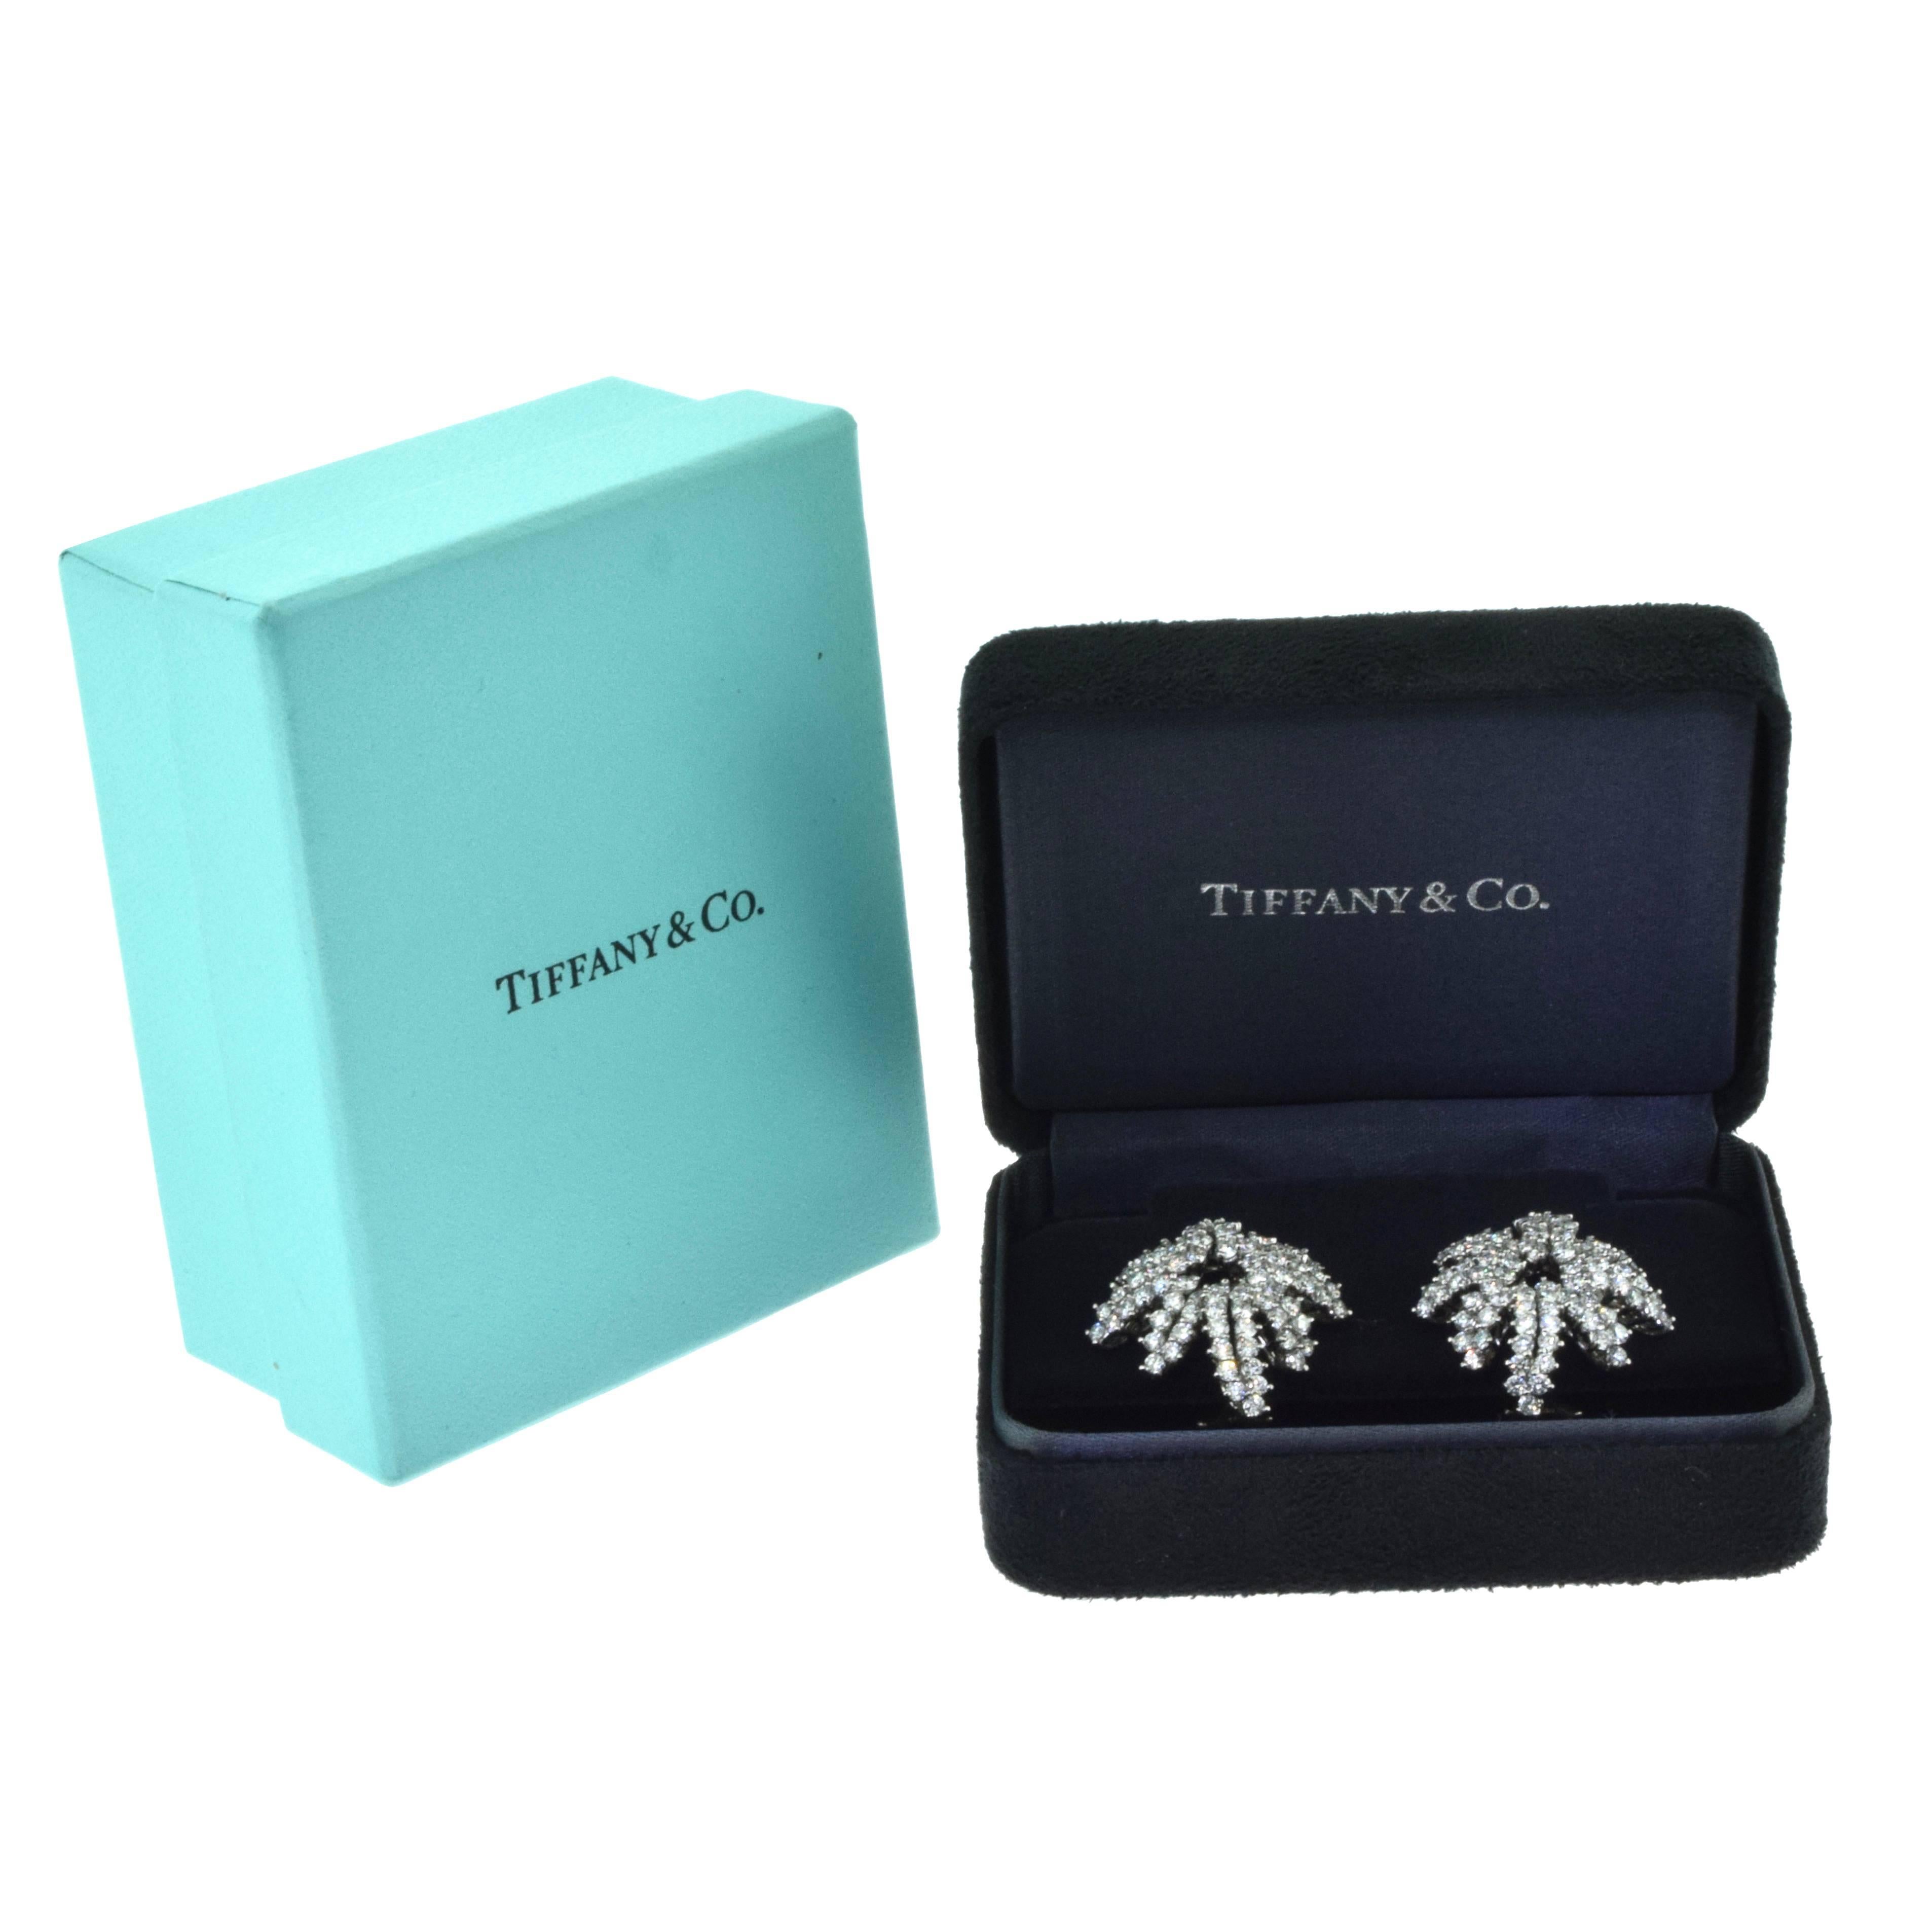 Designer: Tiffany & Co.​​​​​​​
Collection: Fireworks
Metal: Platinum, 18k White Gold 
Stones: 168 Round Brilliant Cut Diamonds
Diamond Color: F - G
Diamond Clarity: VVS - VS
Total Carat Weight: 6.8 ct 
Total Item Weight (g):  17.2
Dimensions: